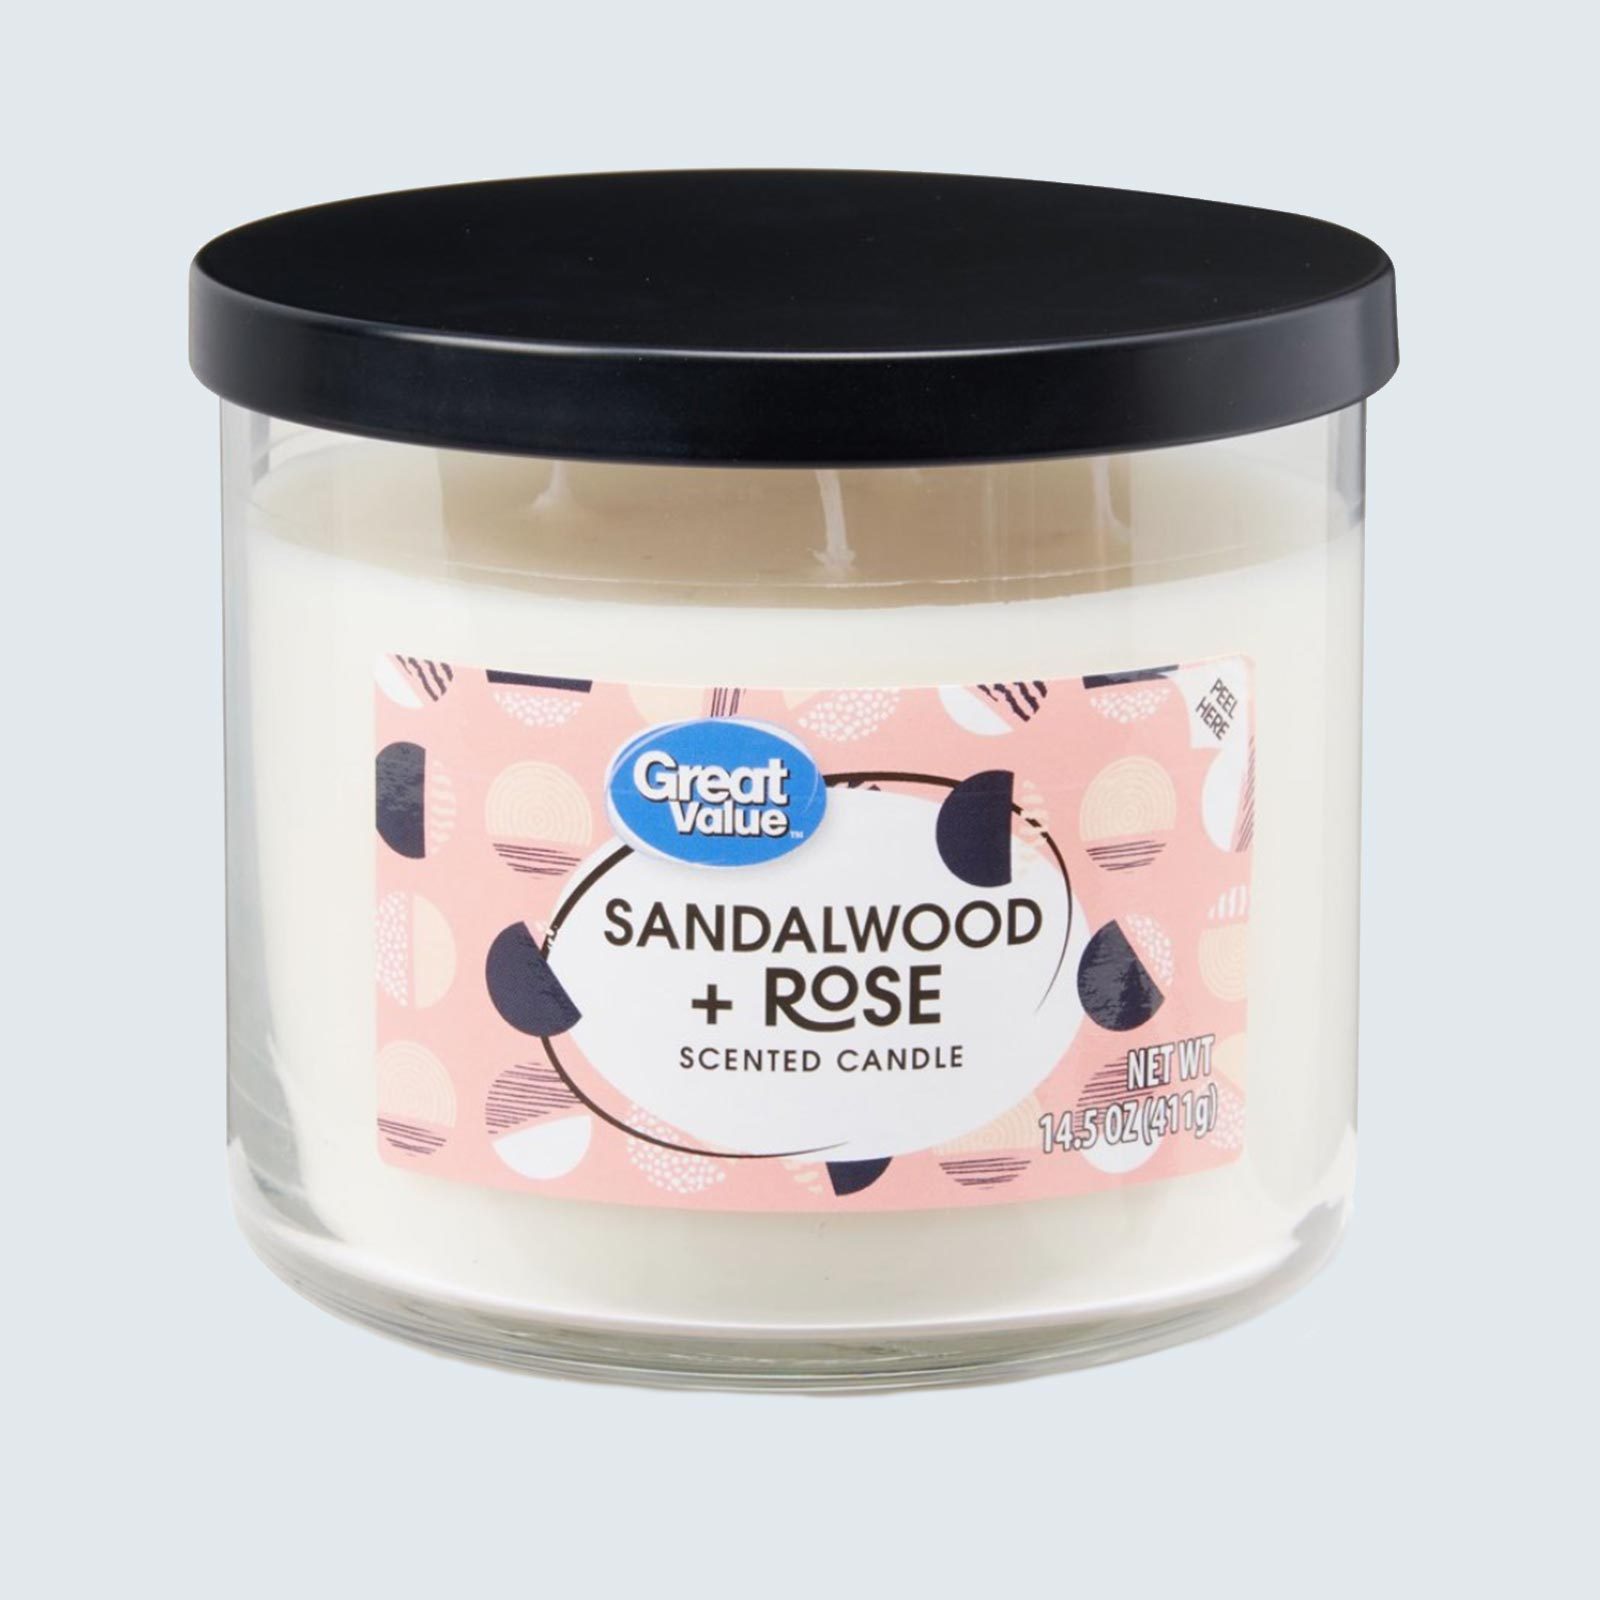 Great Value Sandalwood & Rose Scented Candle